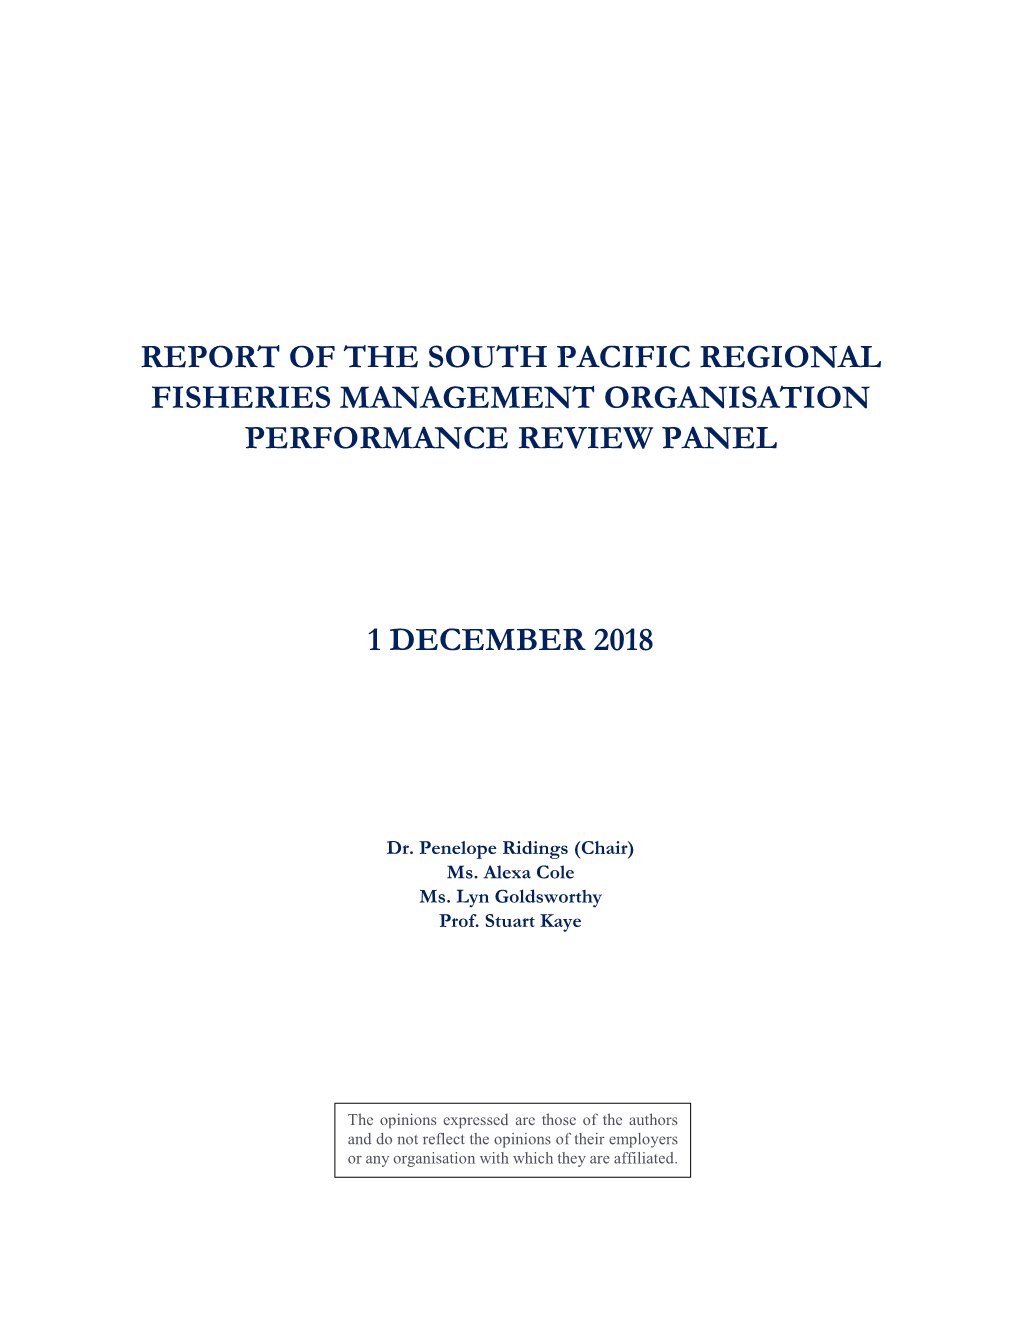 Report of the SPRFMO Performance Review Panel I